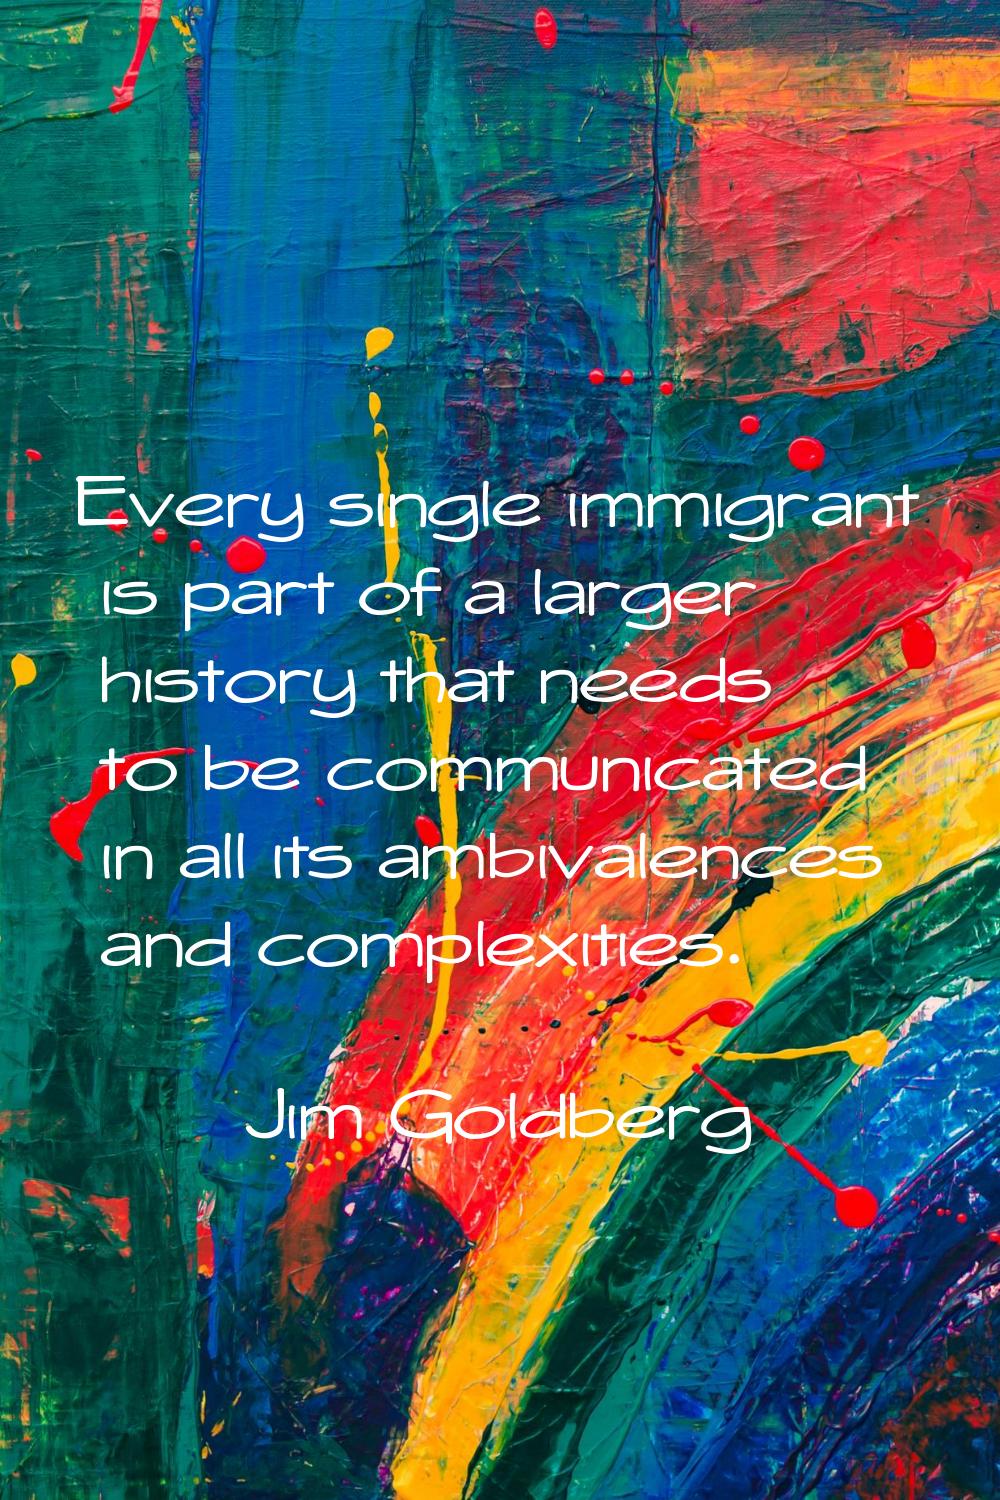 Every single immigrant is part of a larger history that needs to be communicated in all its ambival